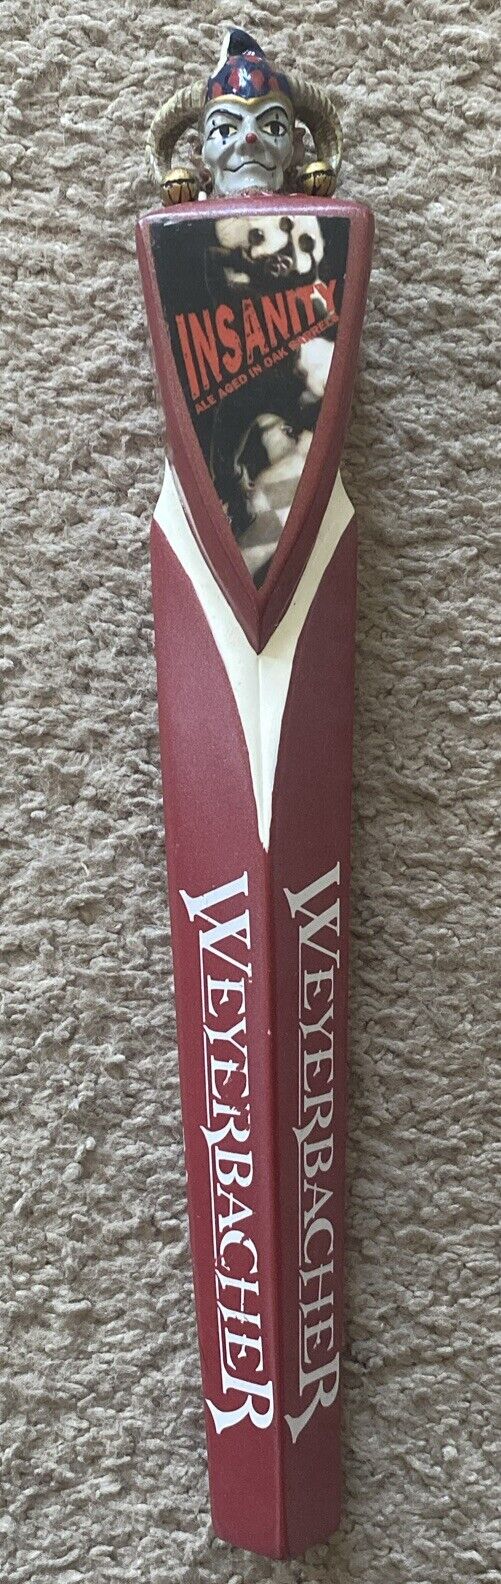 Weyerbacher Brewing Jester Beer Tap Handle 12” Tall, Damaged